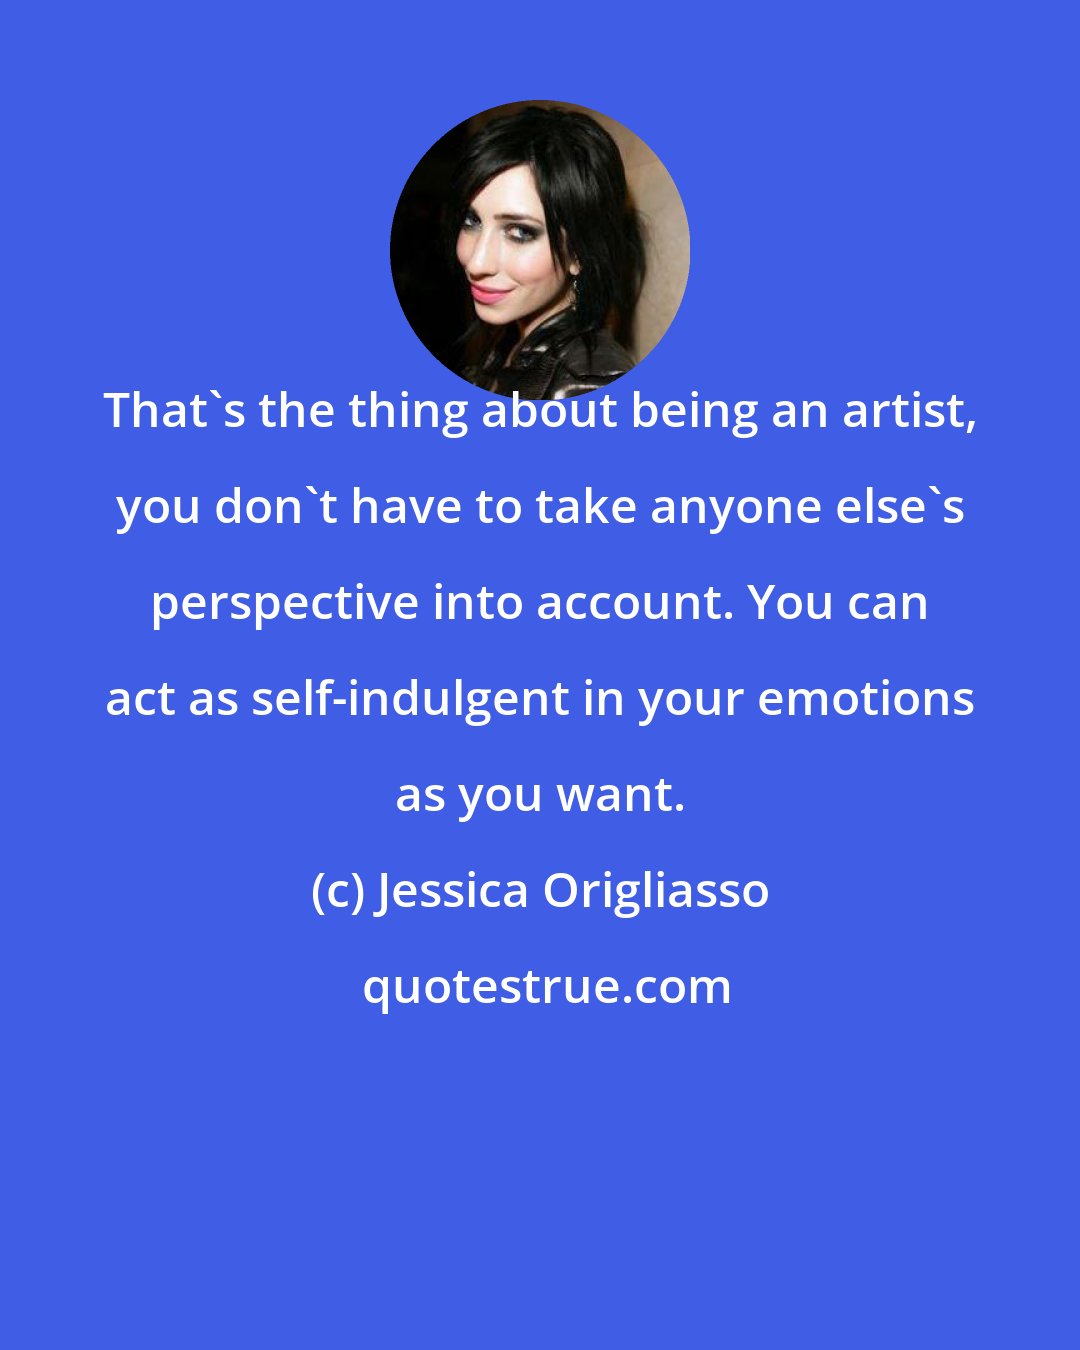 Jessica Origliasso: That's the thing about being an artist, you don't have to take anyone else's perspective into account. You can act as self-indulgent in your emotions as you want.